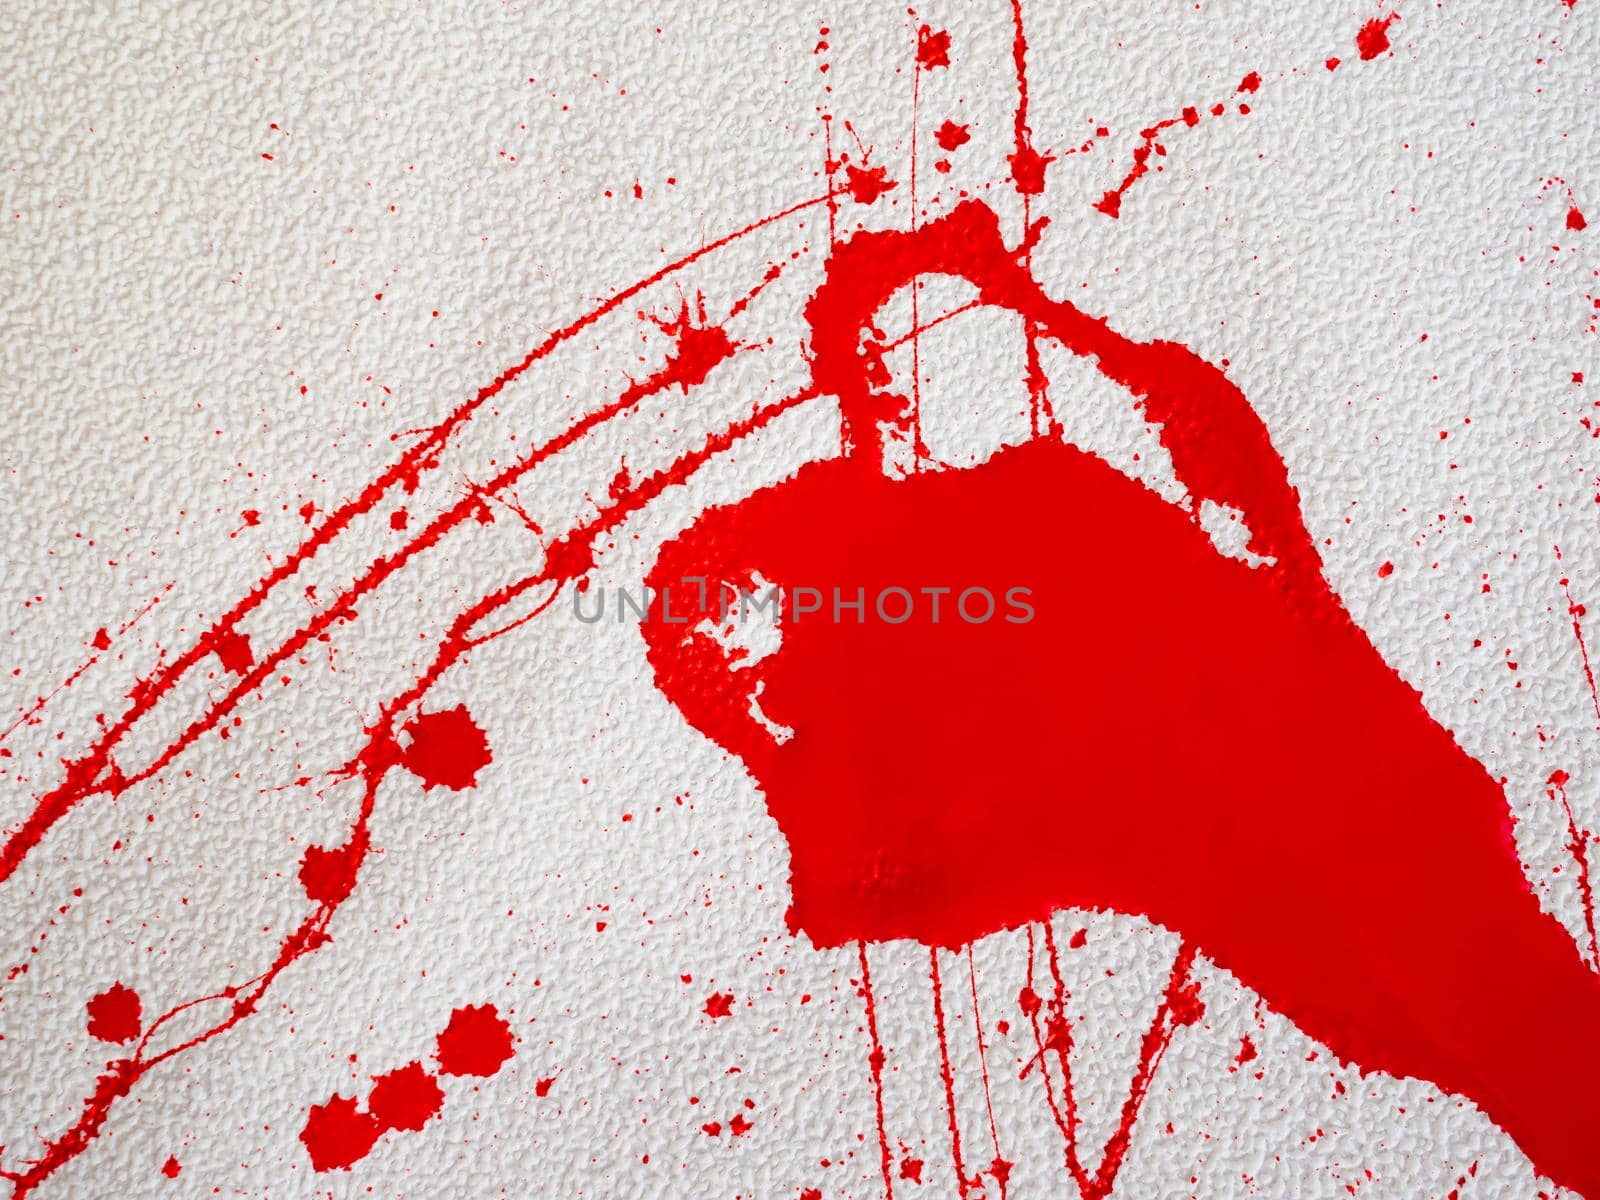 red blot and splashes of paint on a white background. expressionism